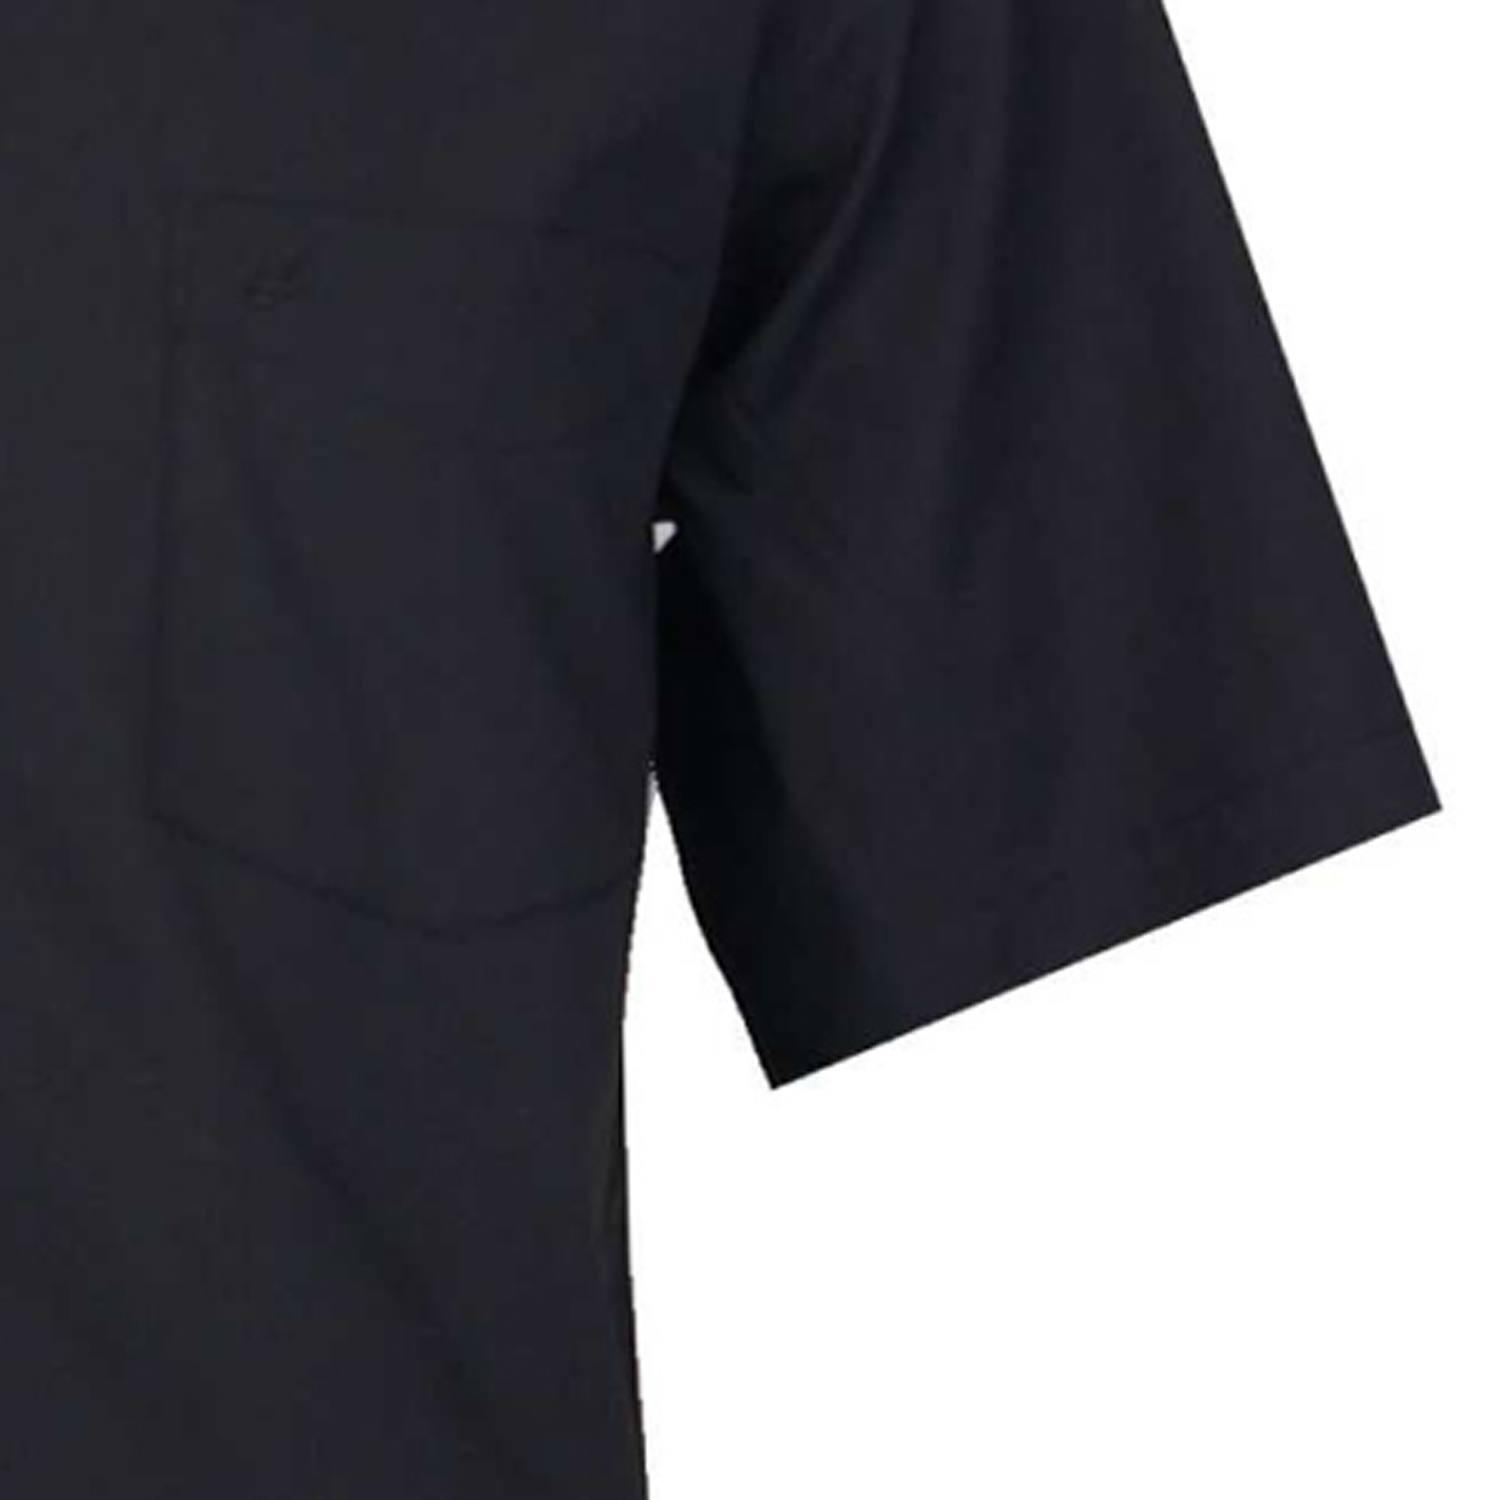 Black shirt by ARRIVEE in big sizes XL up to 8XL